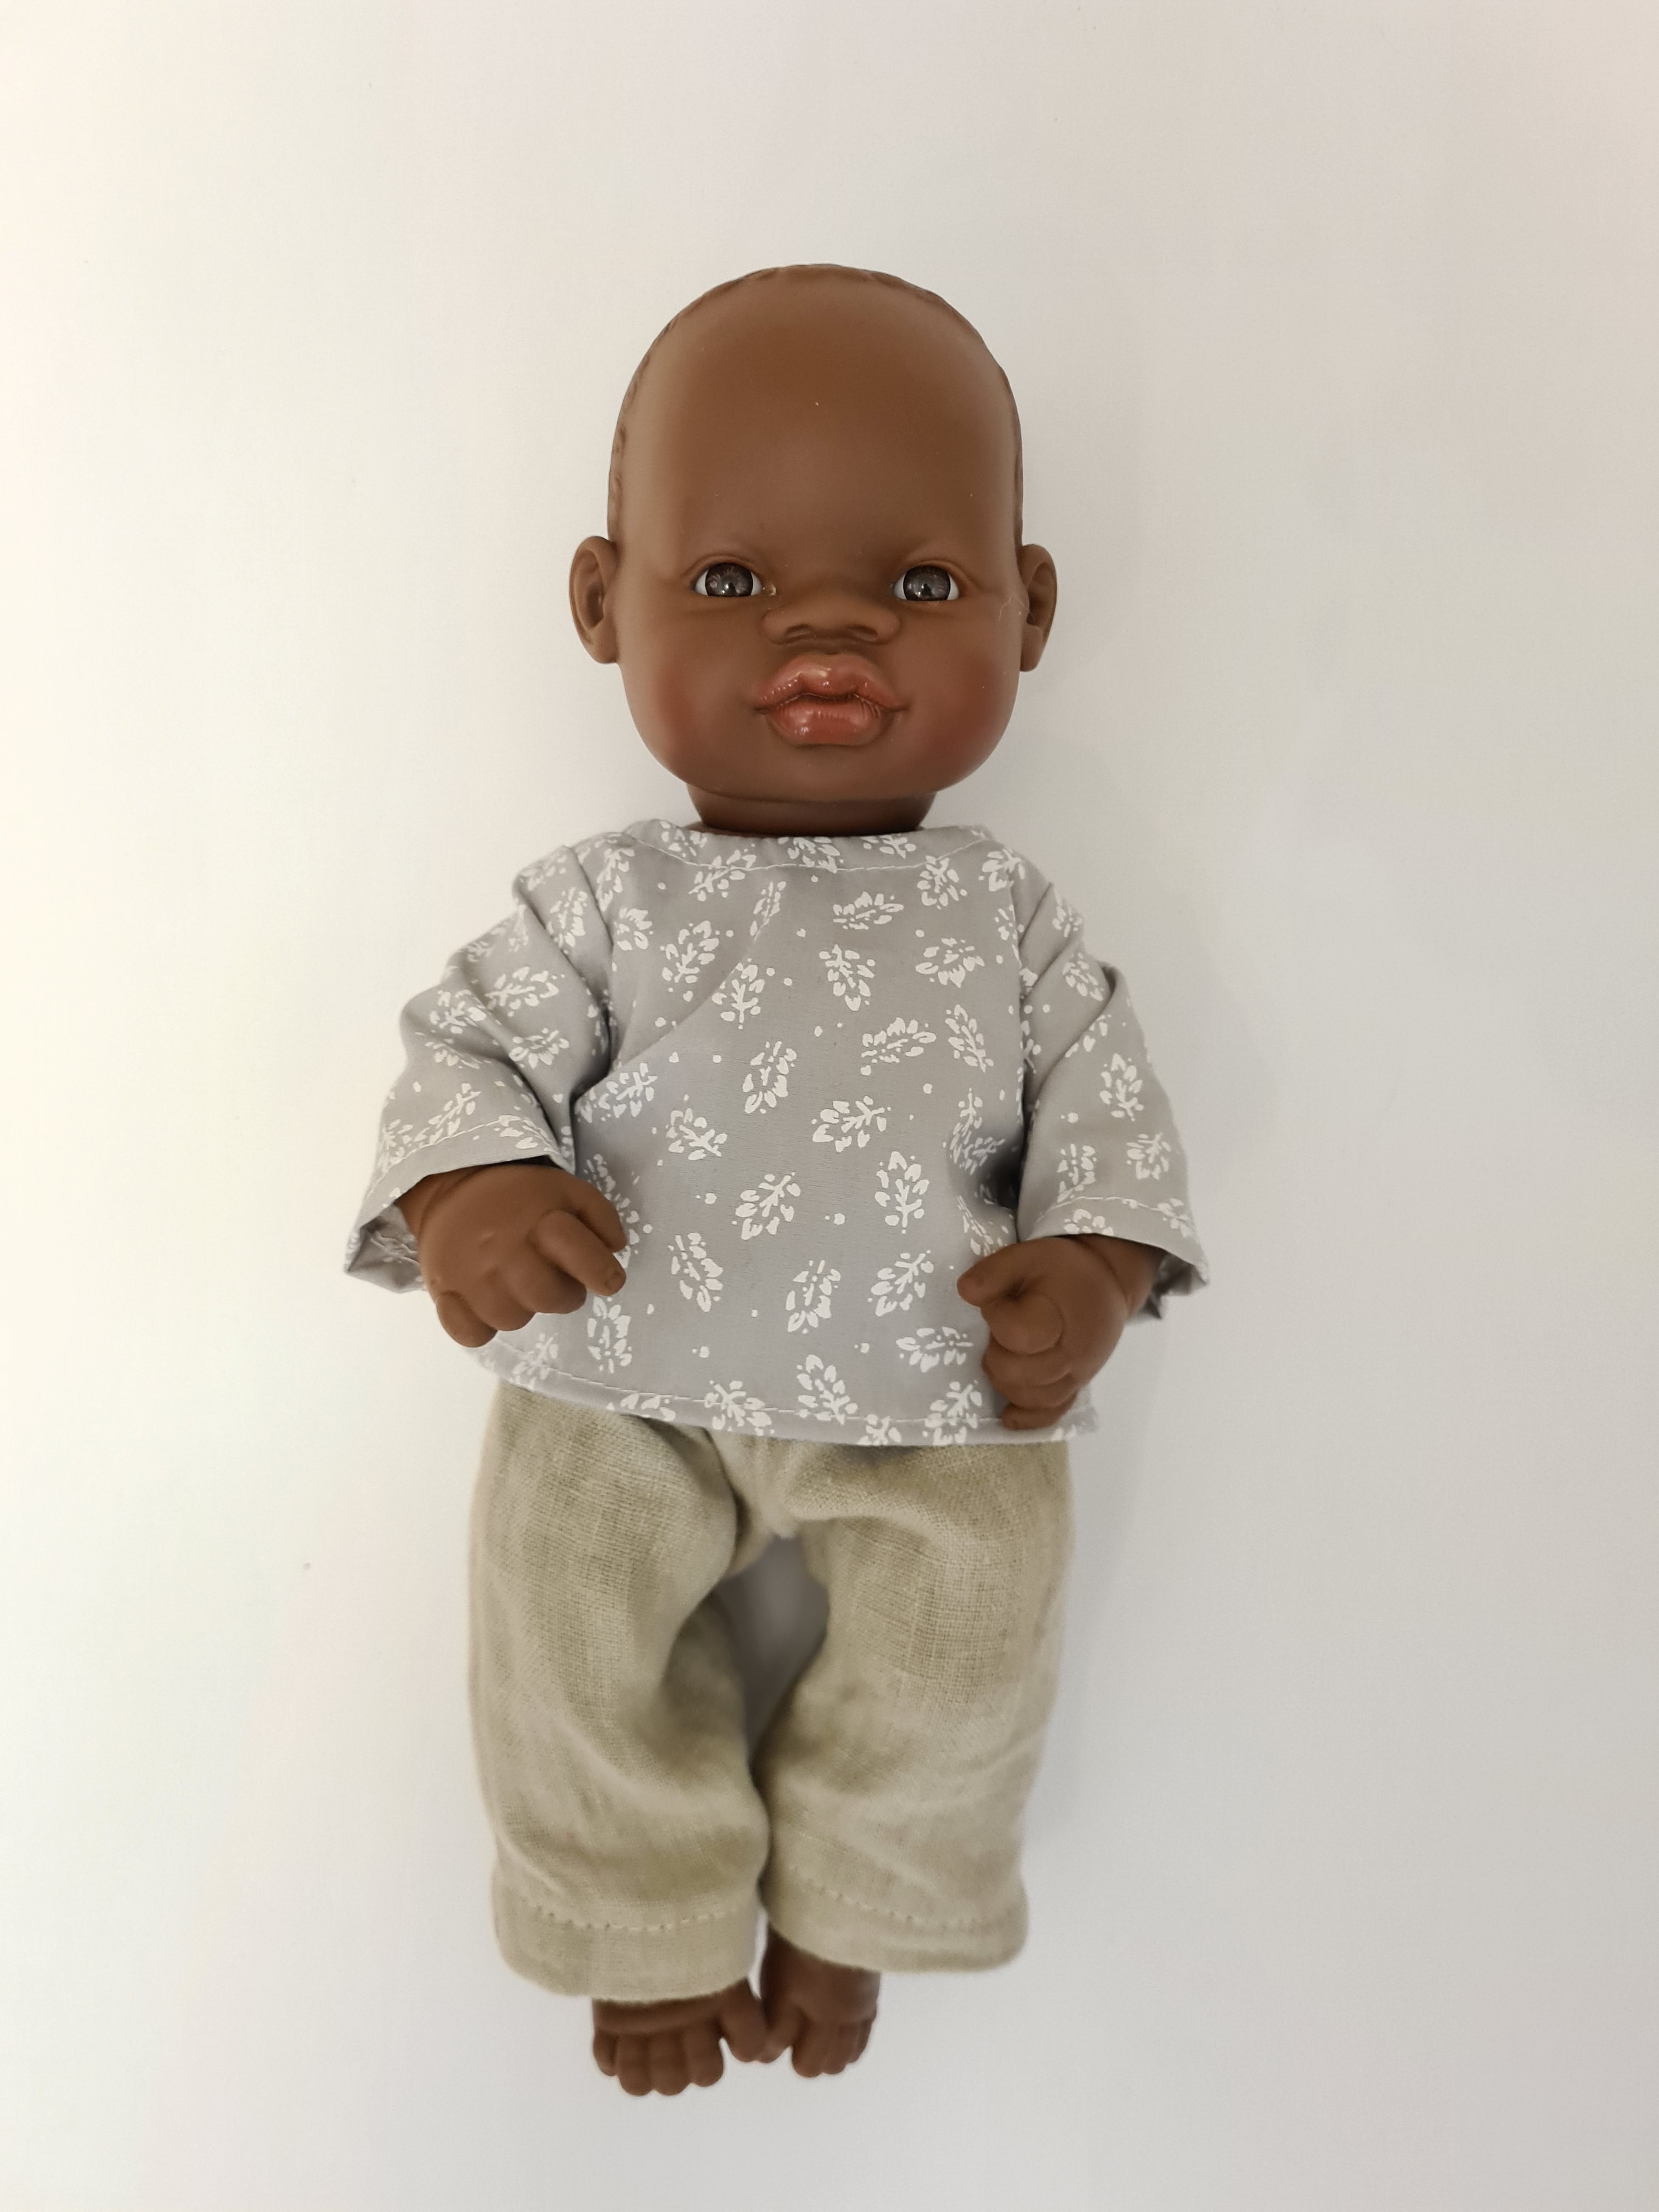 Miniland Doll - 12.63'', 32cm. African Boy Doll with Handmade Clothes.